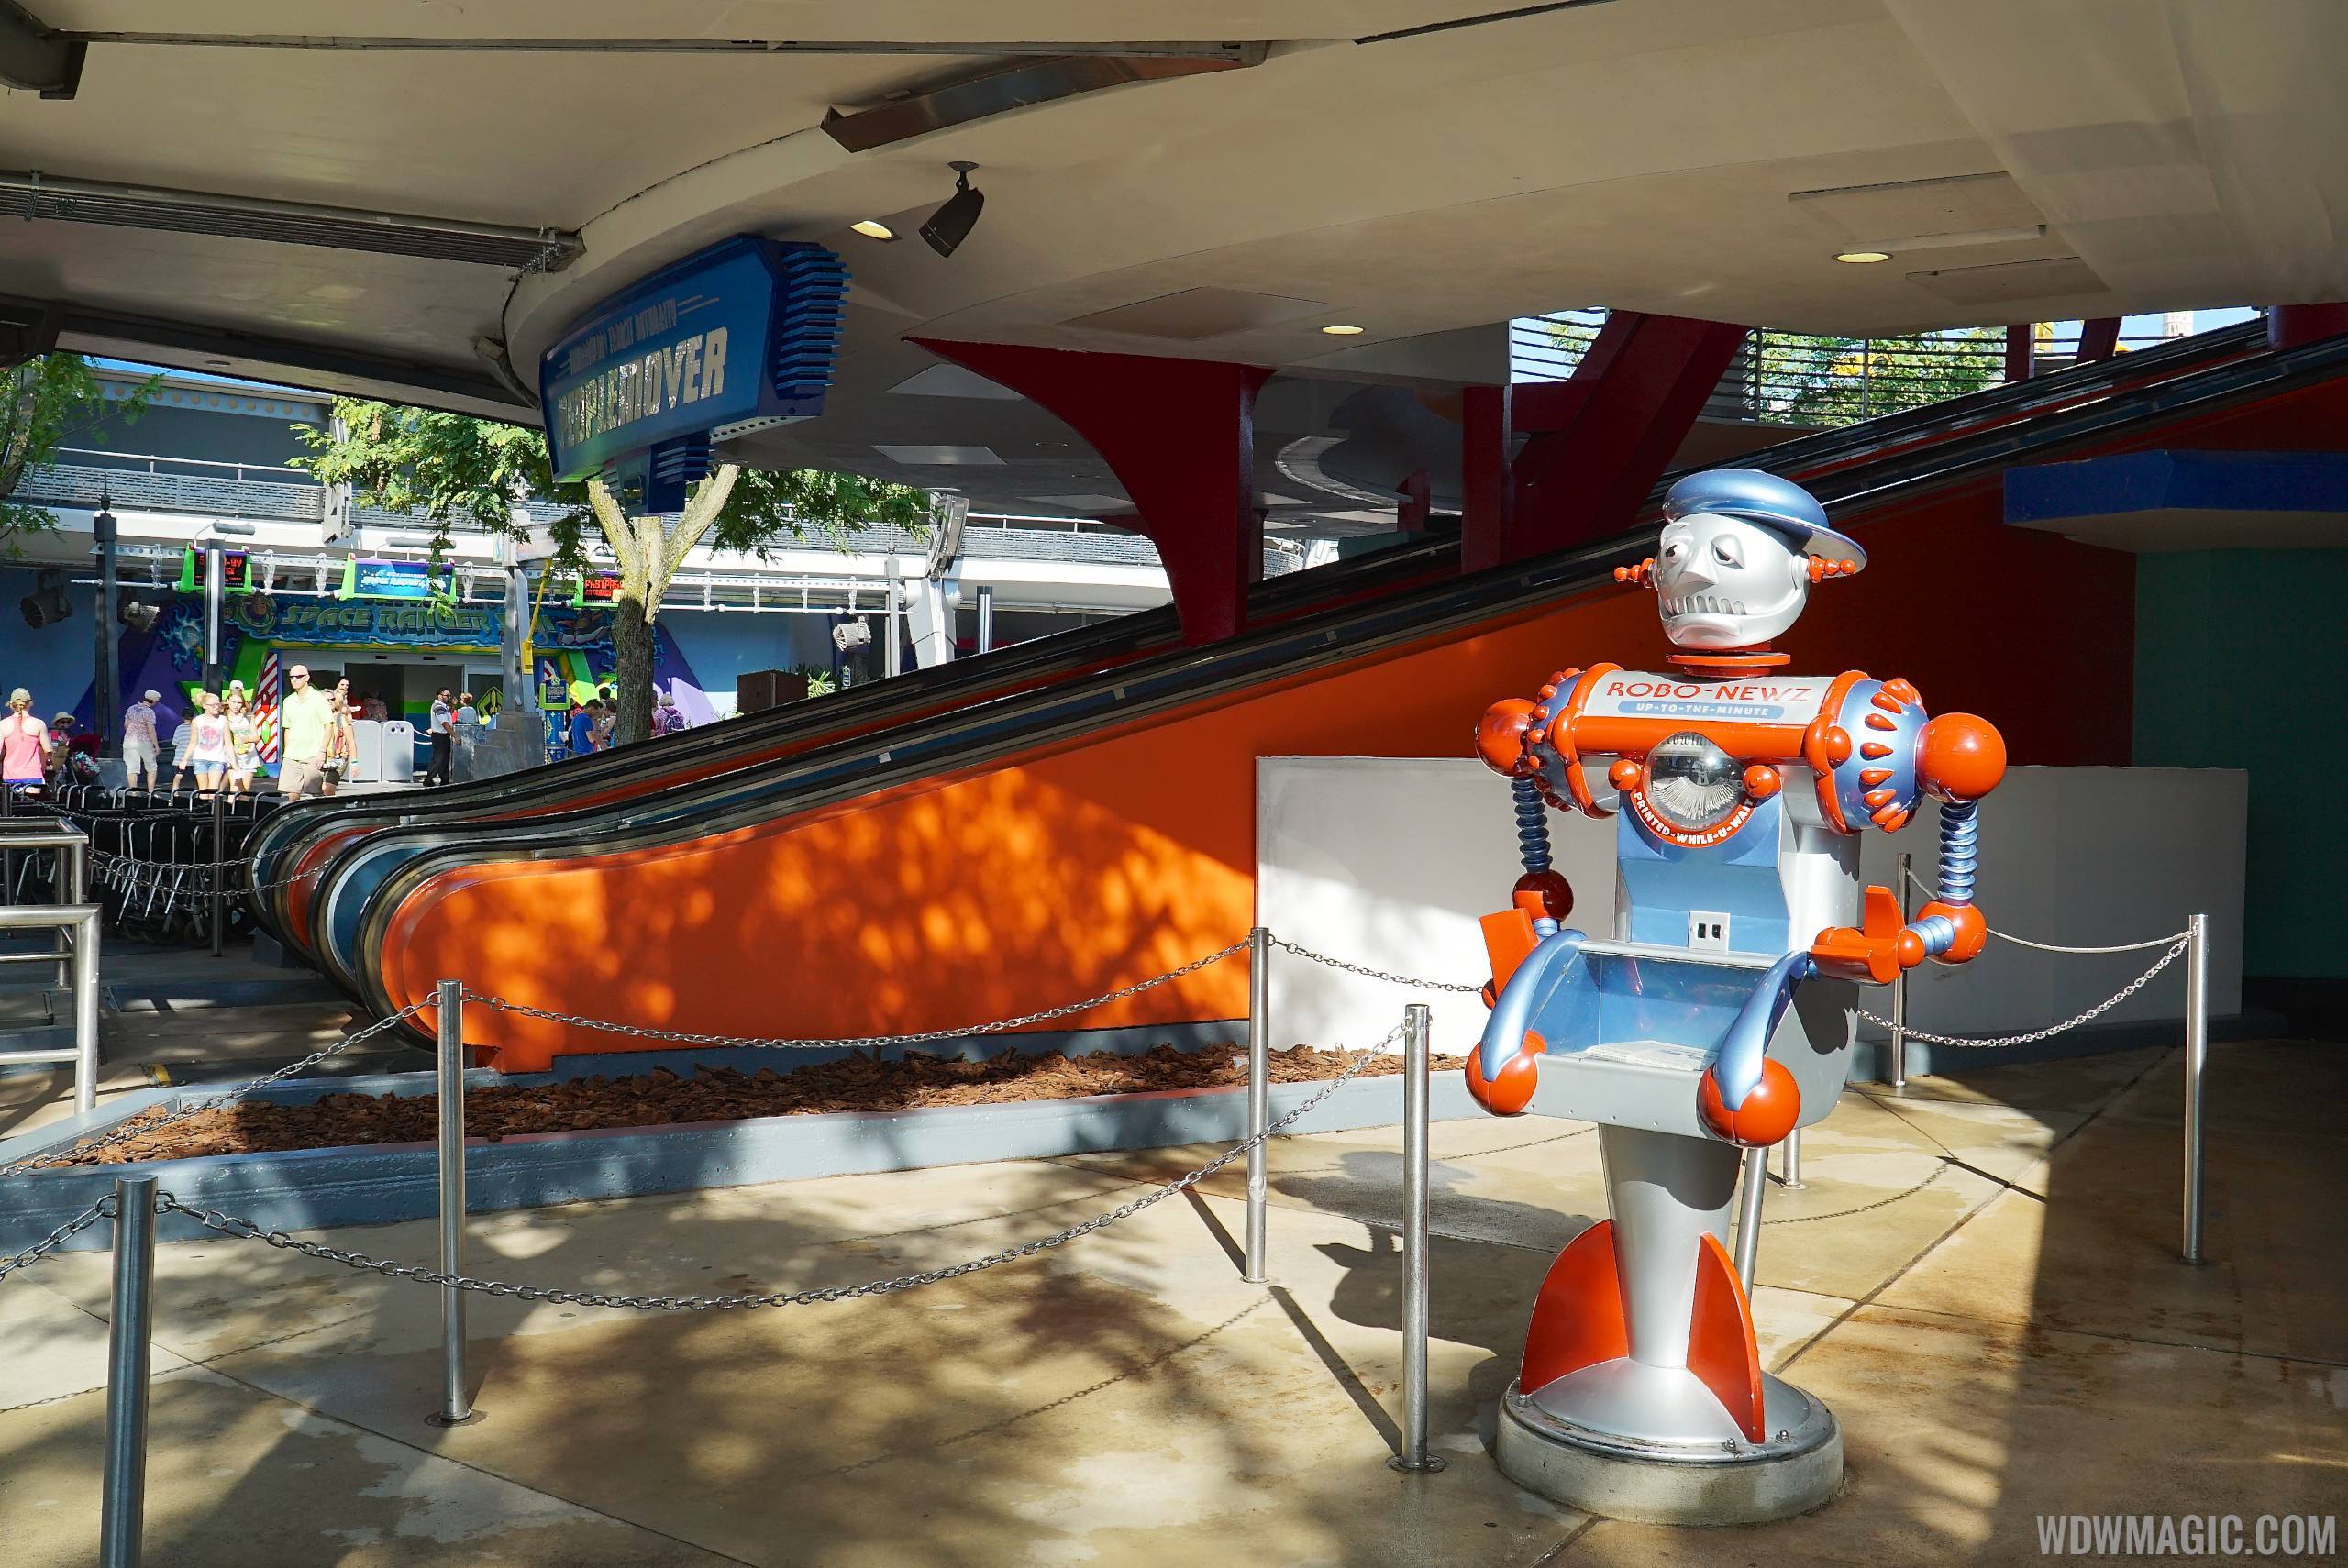 Tomorrowland Transit Authority PeopleMover new color scheme